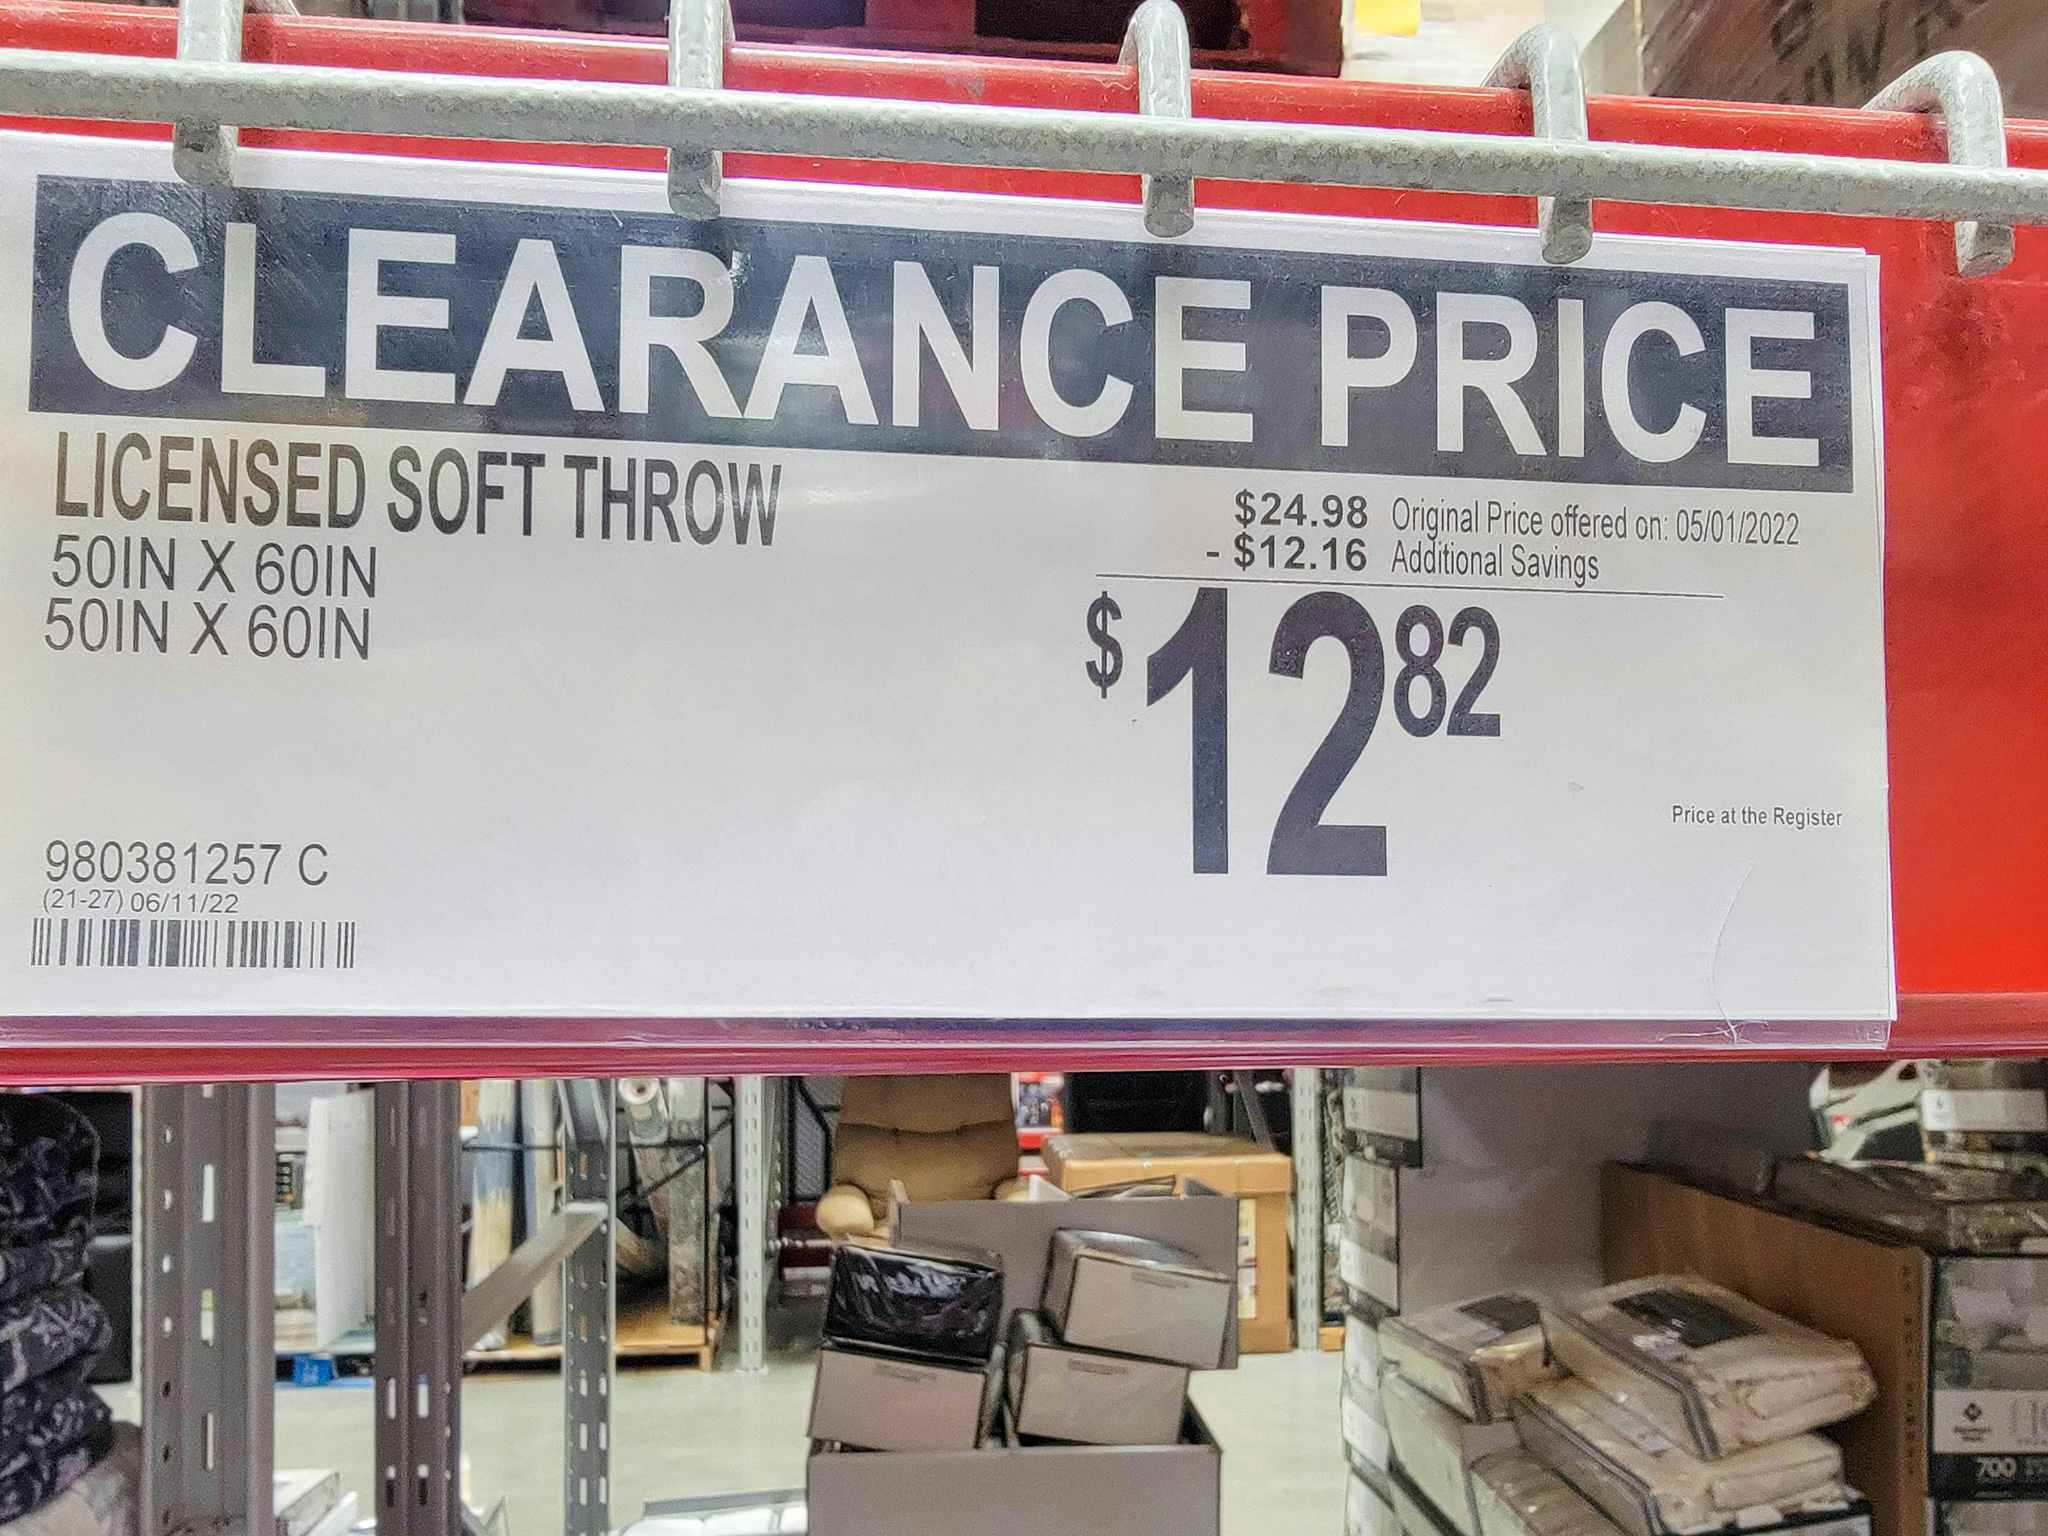 clearance sign for licensed throw blankets